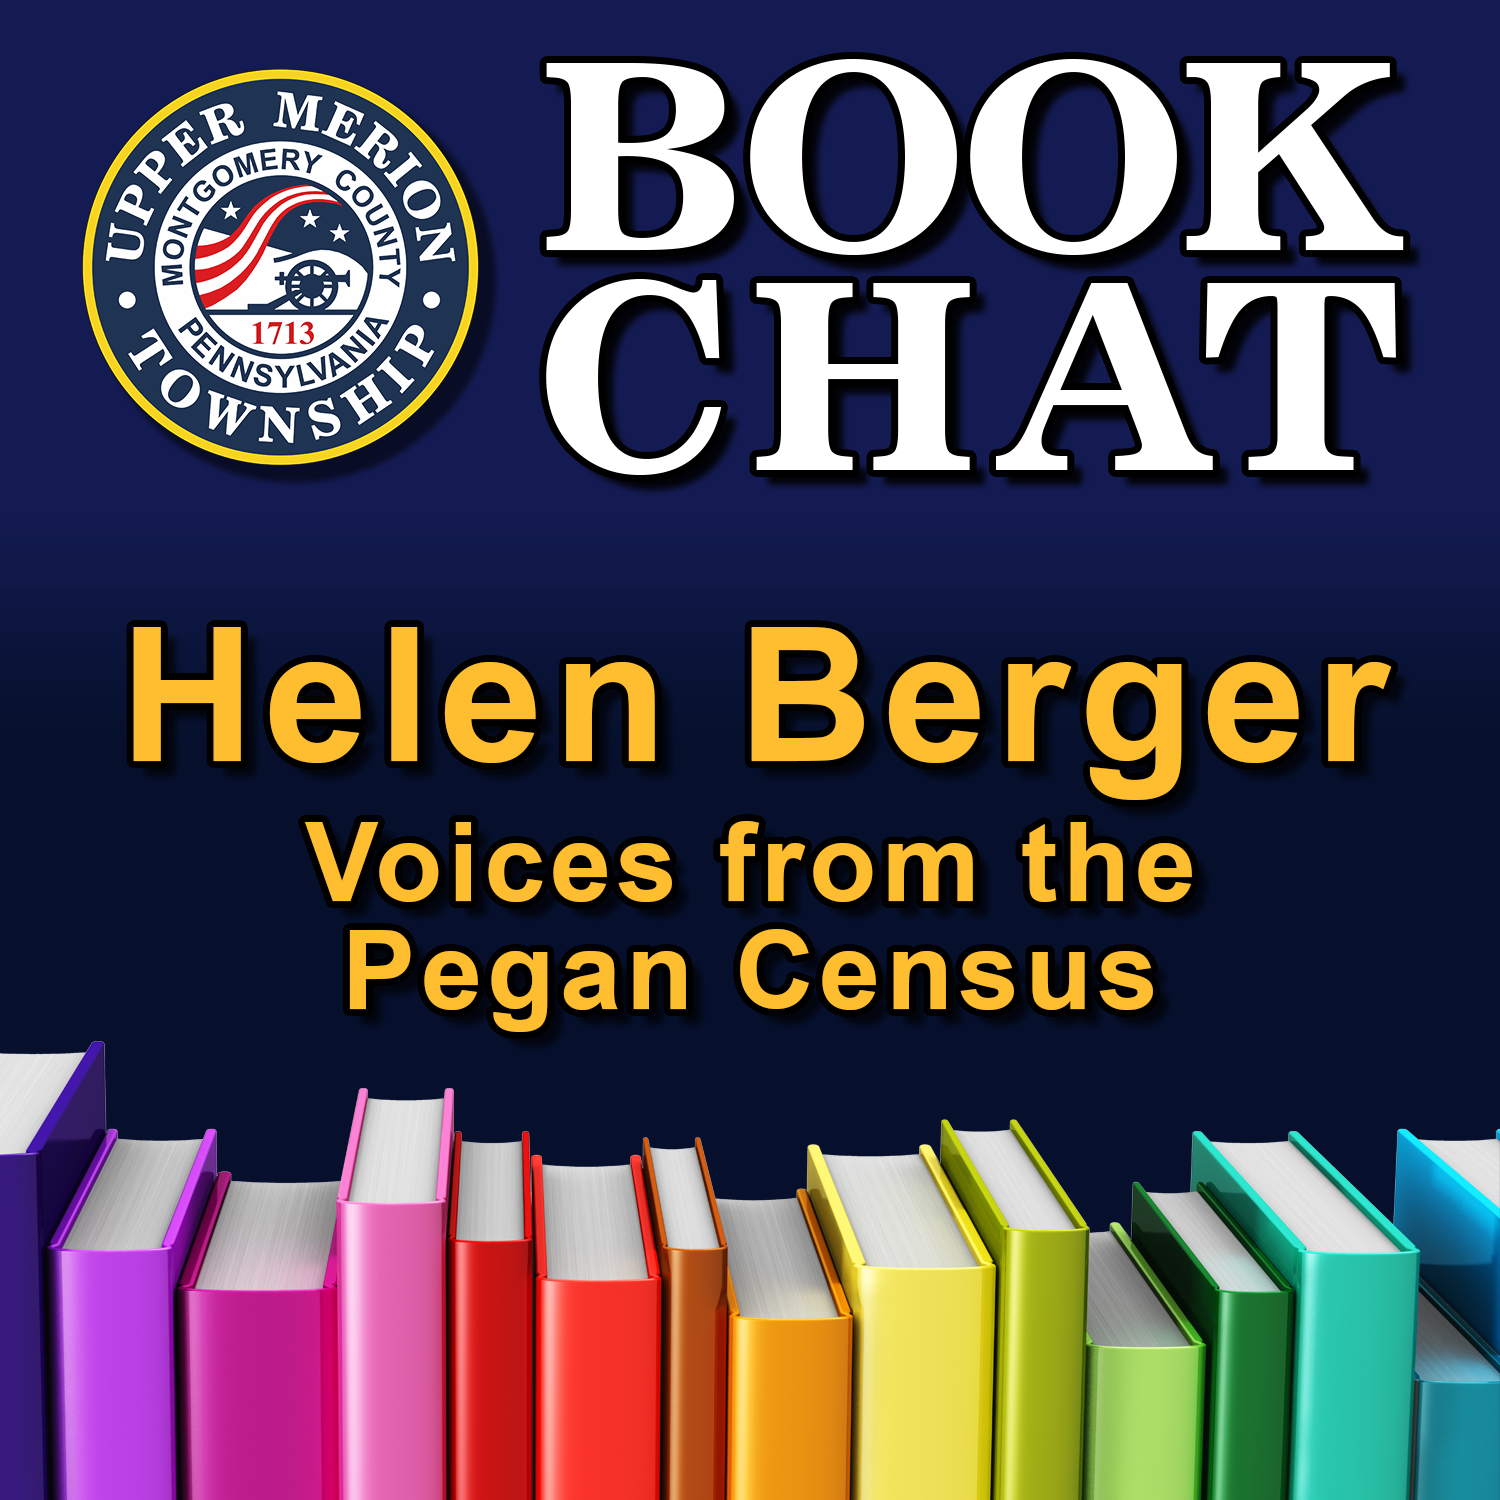 Helen Berger - Voices from the Pegan Census